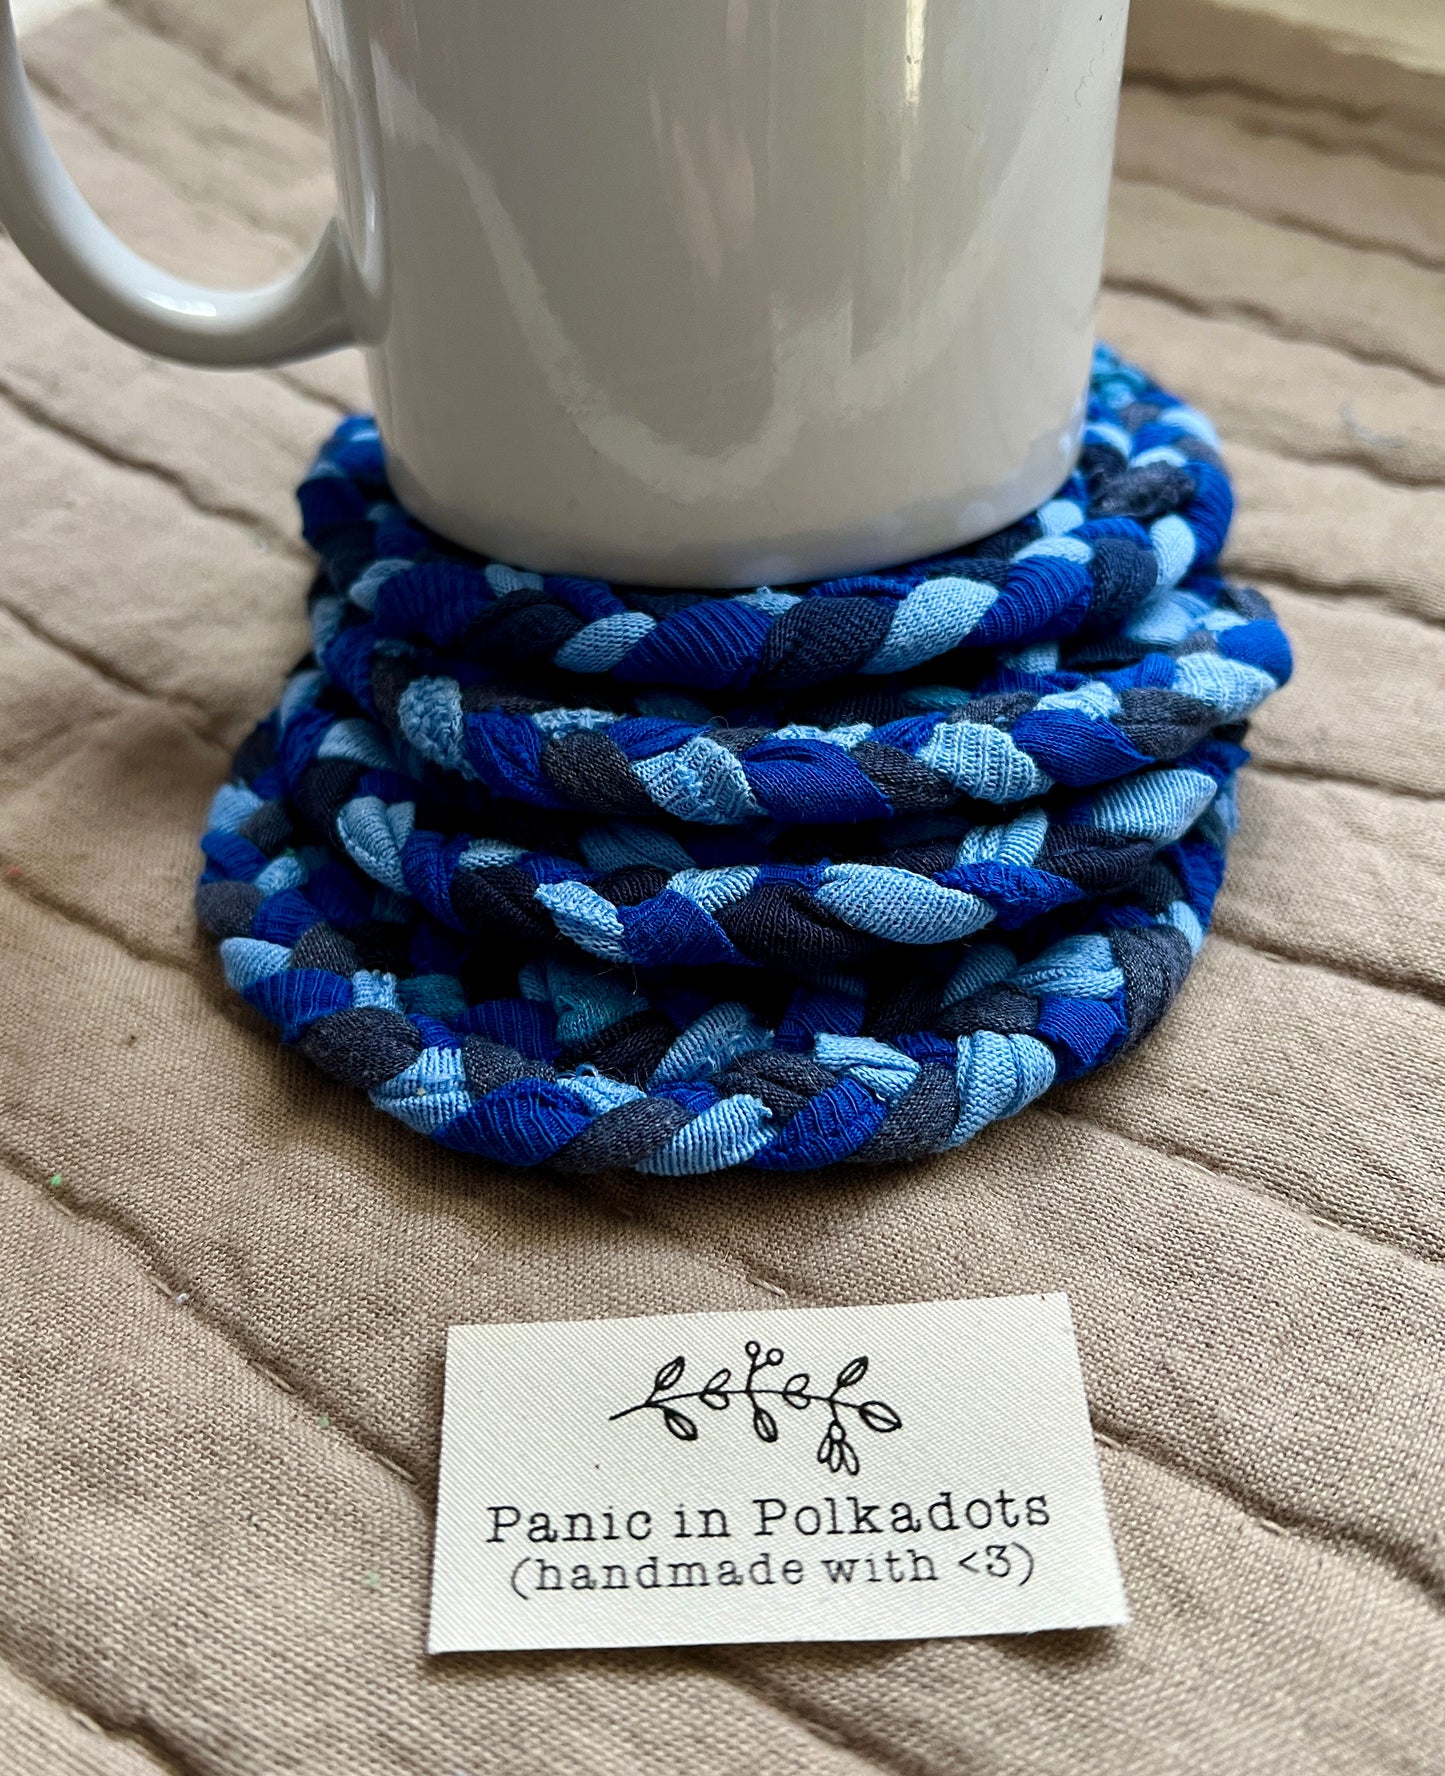 blue denim coasters under mug for scale, Panic in Polkadots label in front